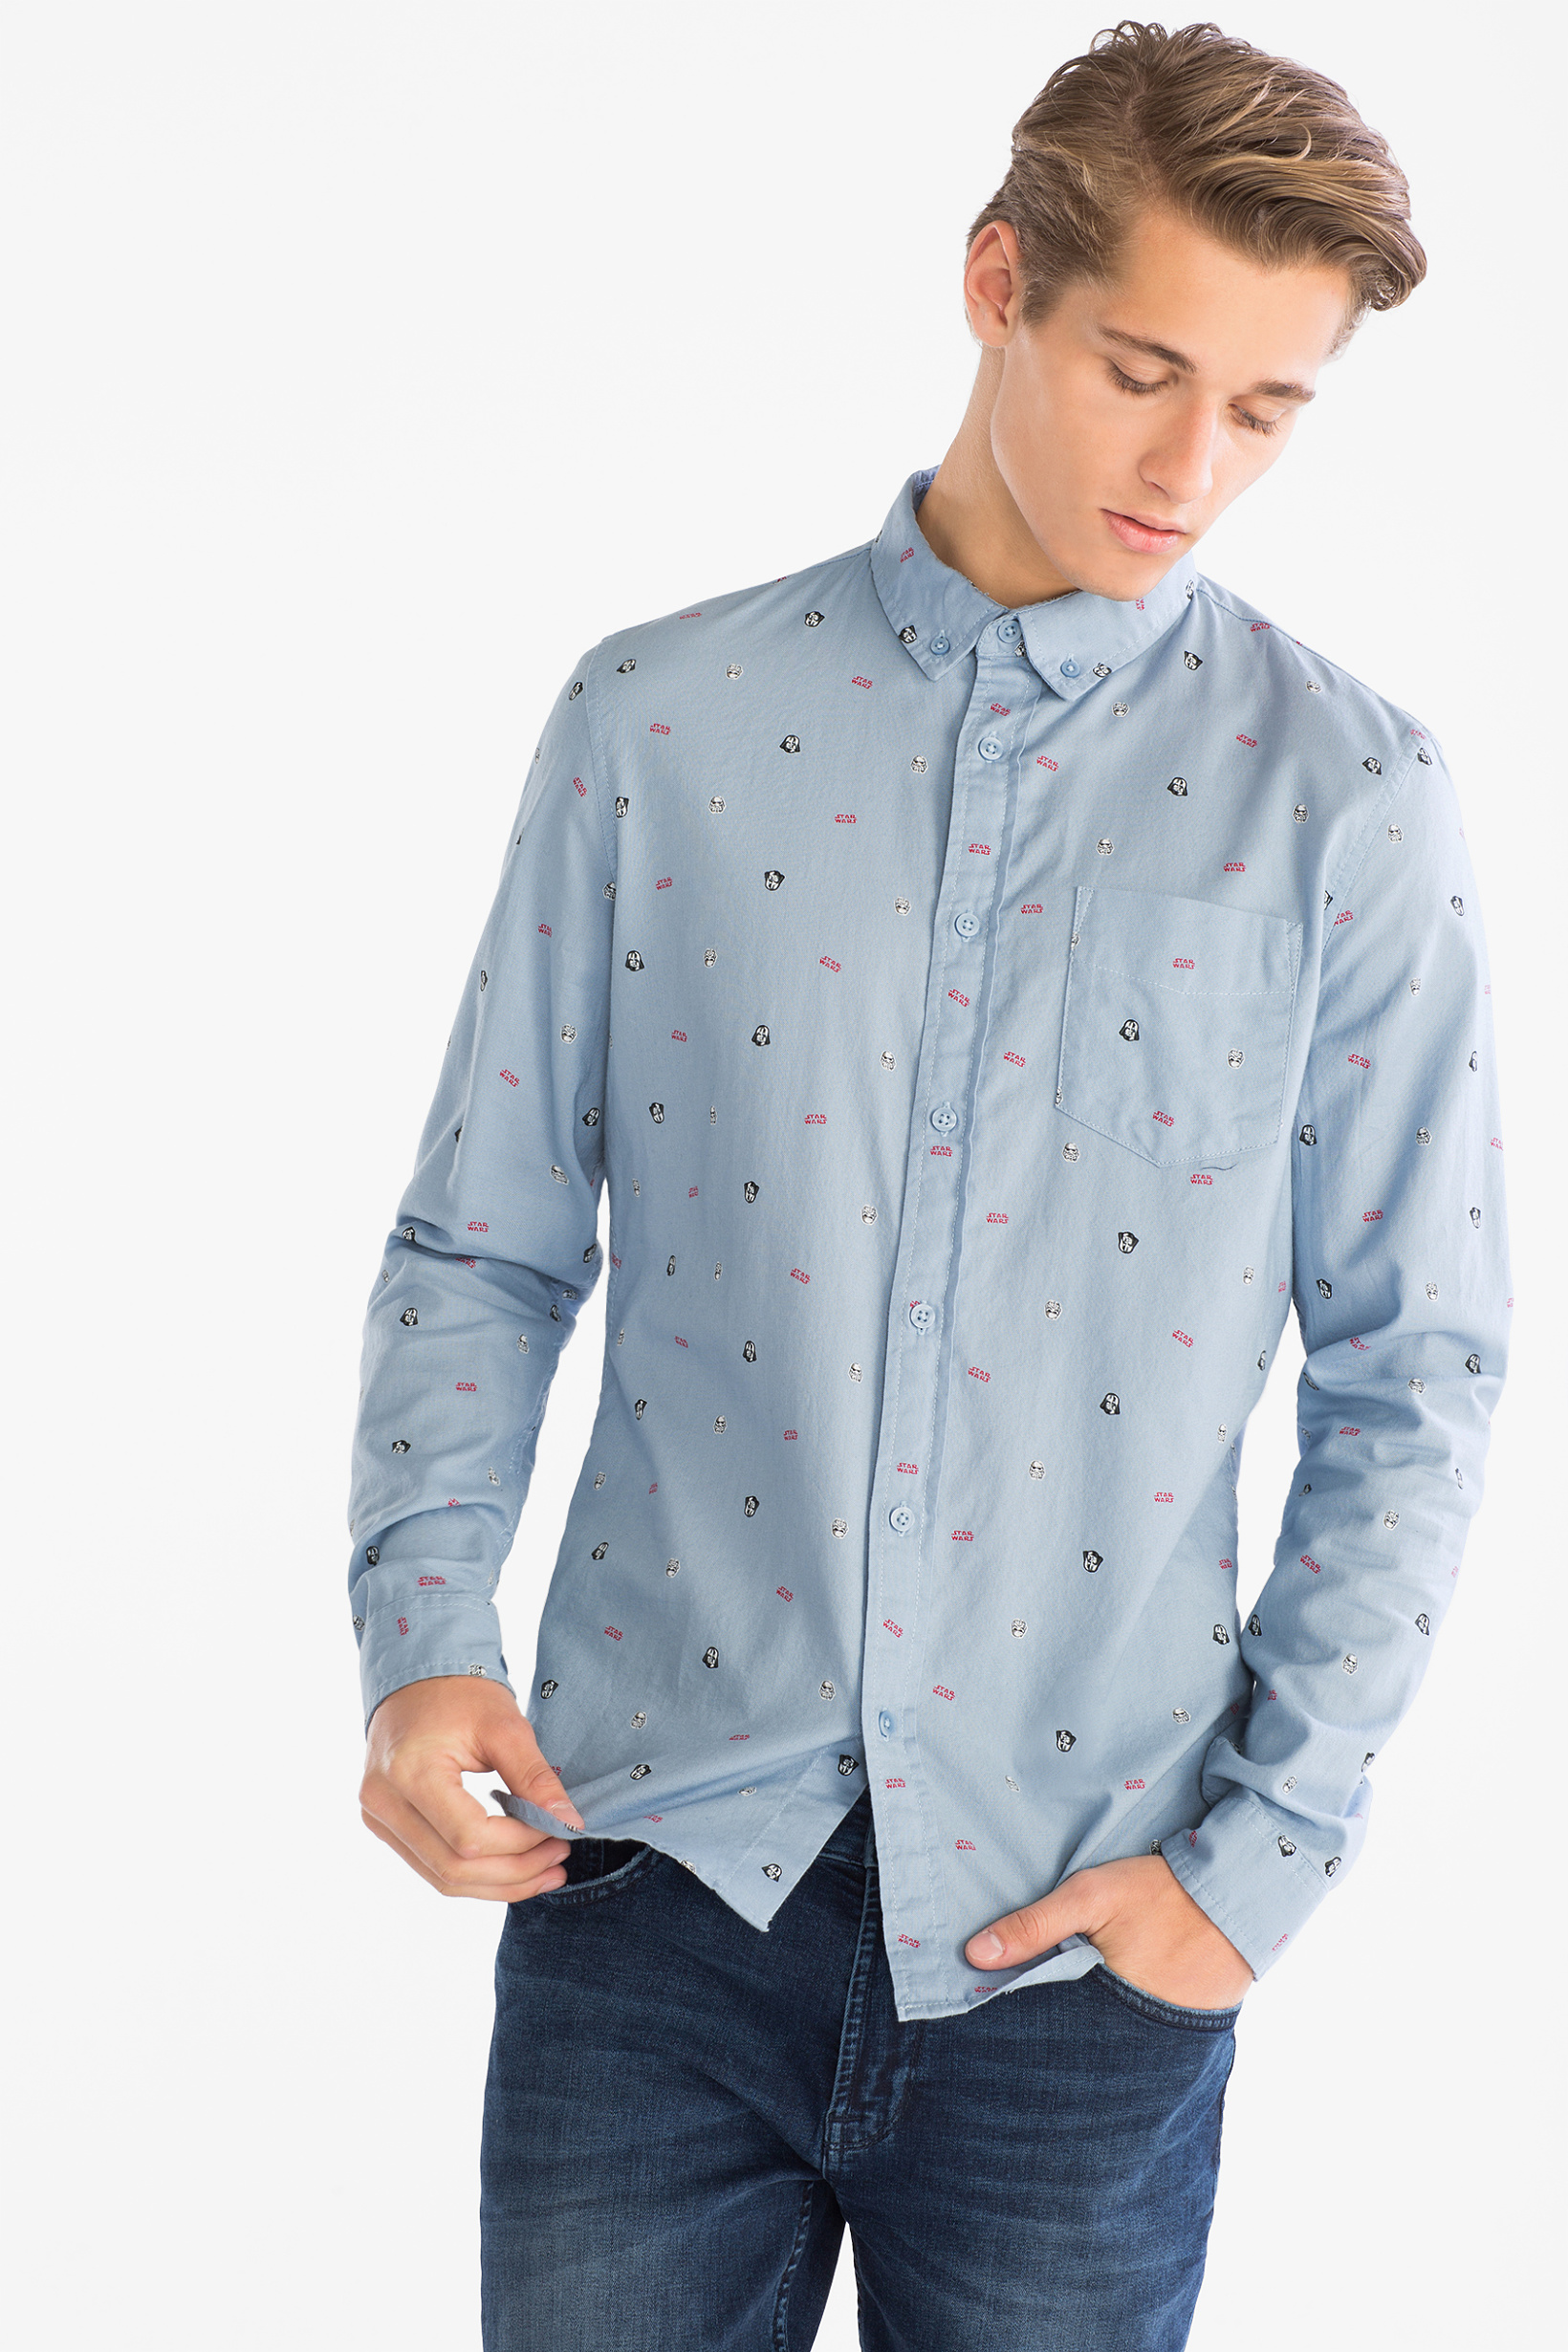 Clockhouse Star Wars overhemd Straight Fit button down